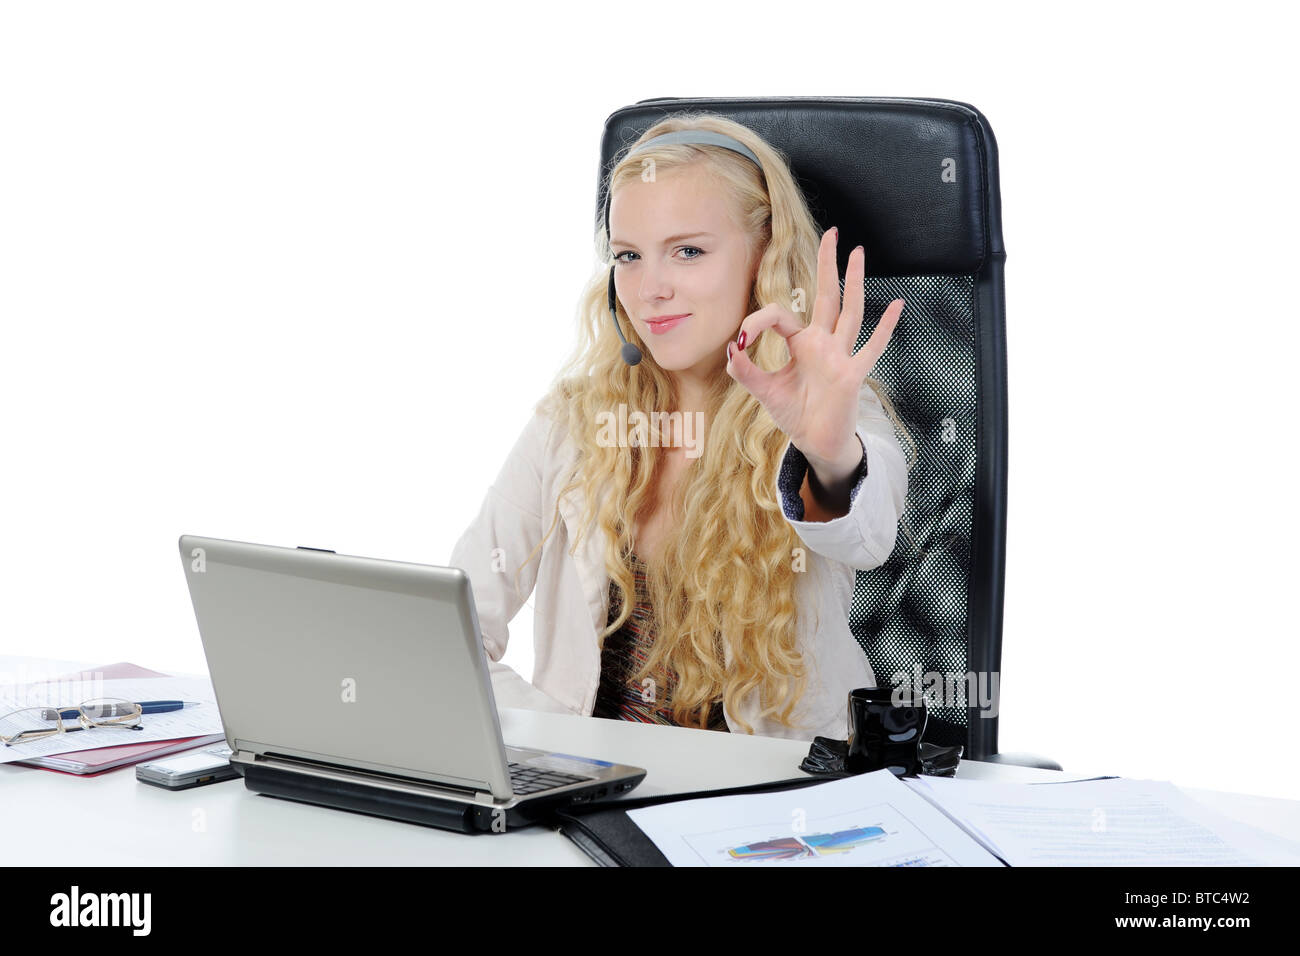 woman with a laptop. Stock Photo